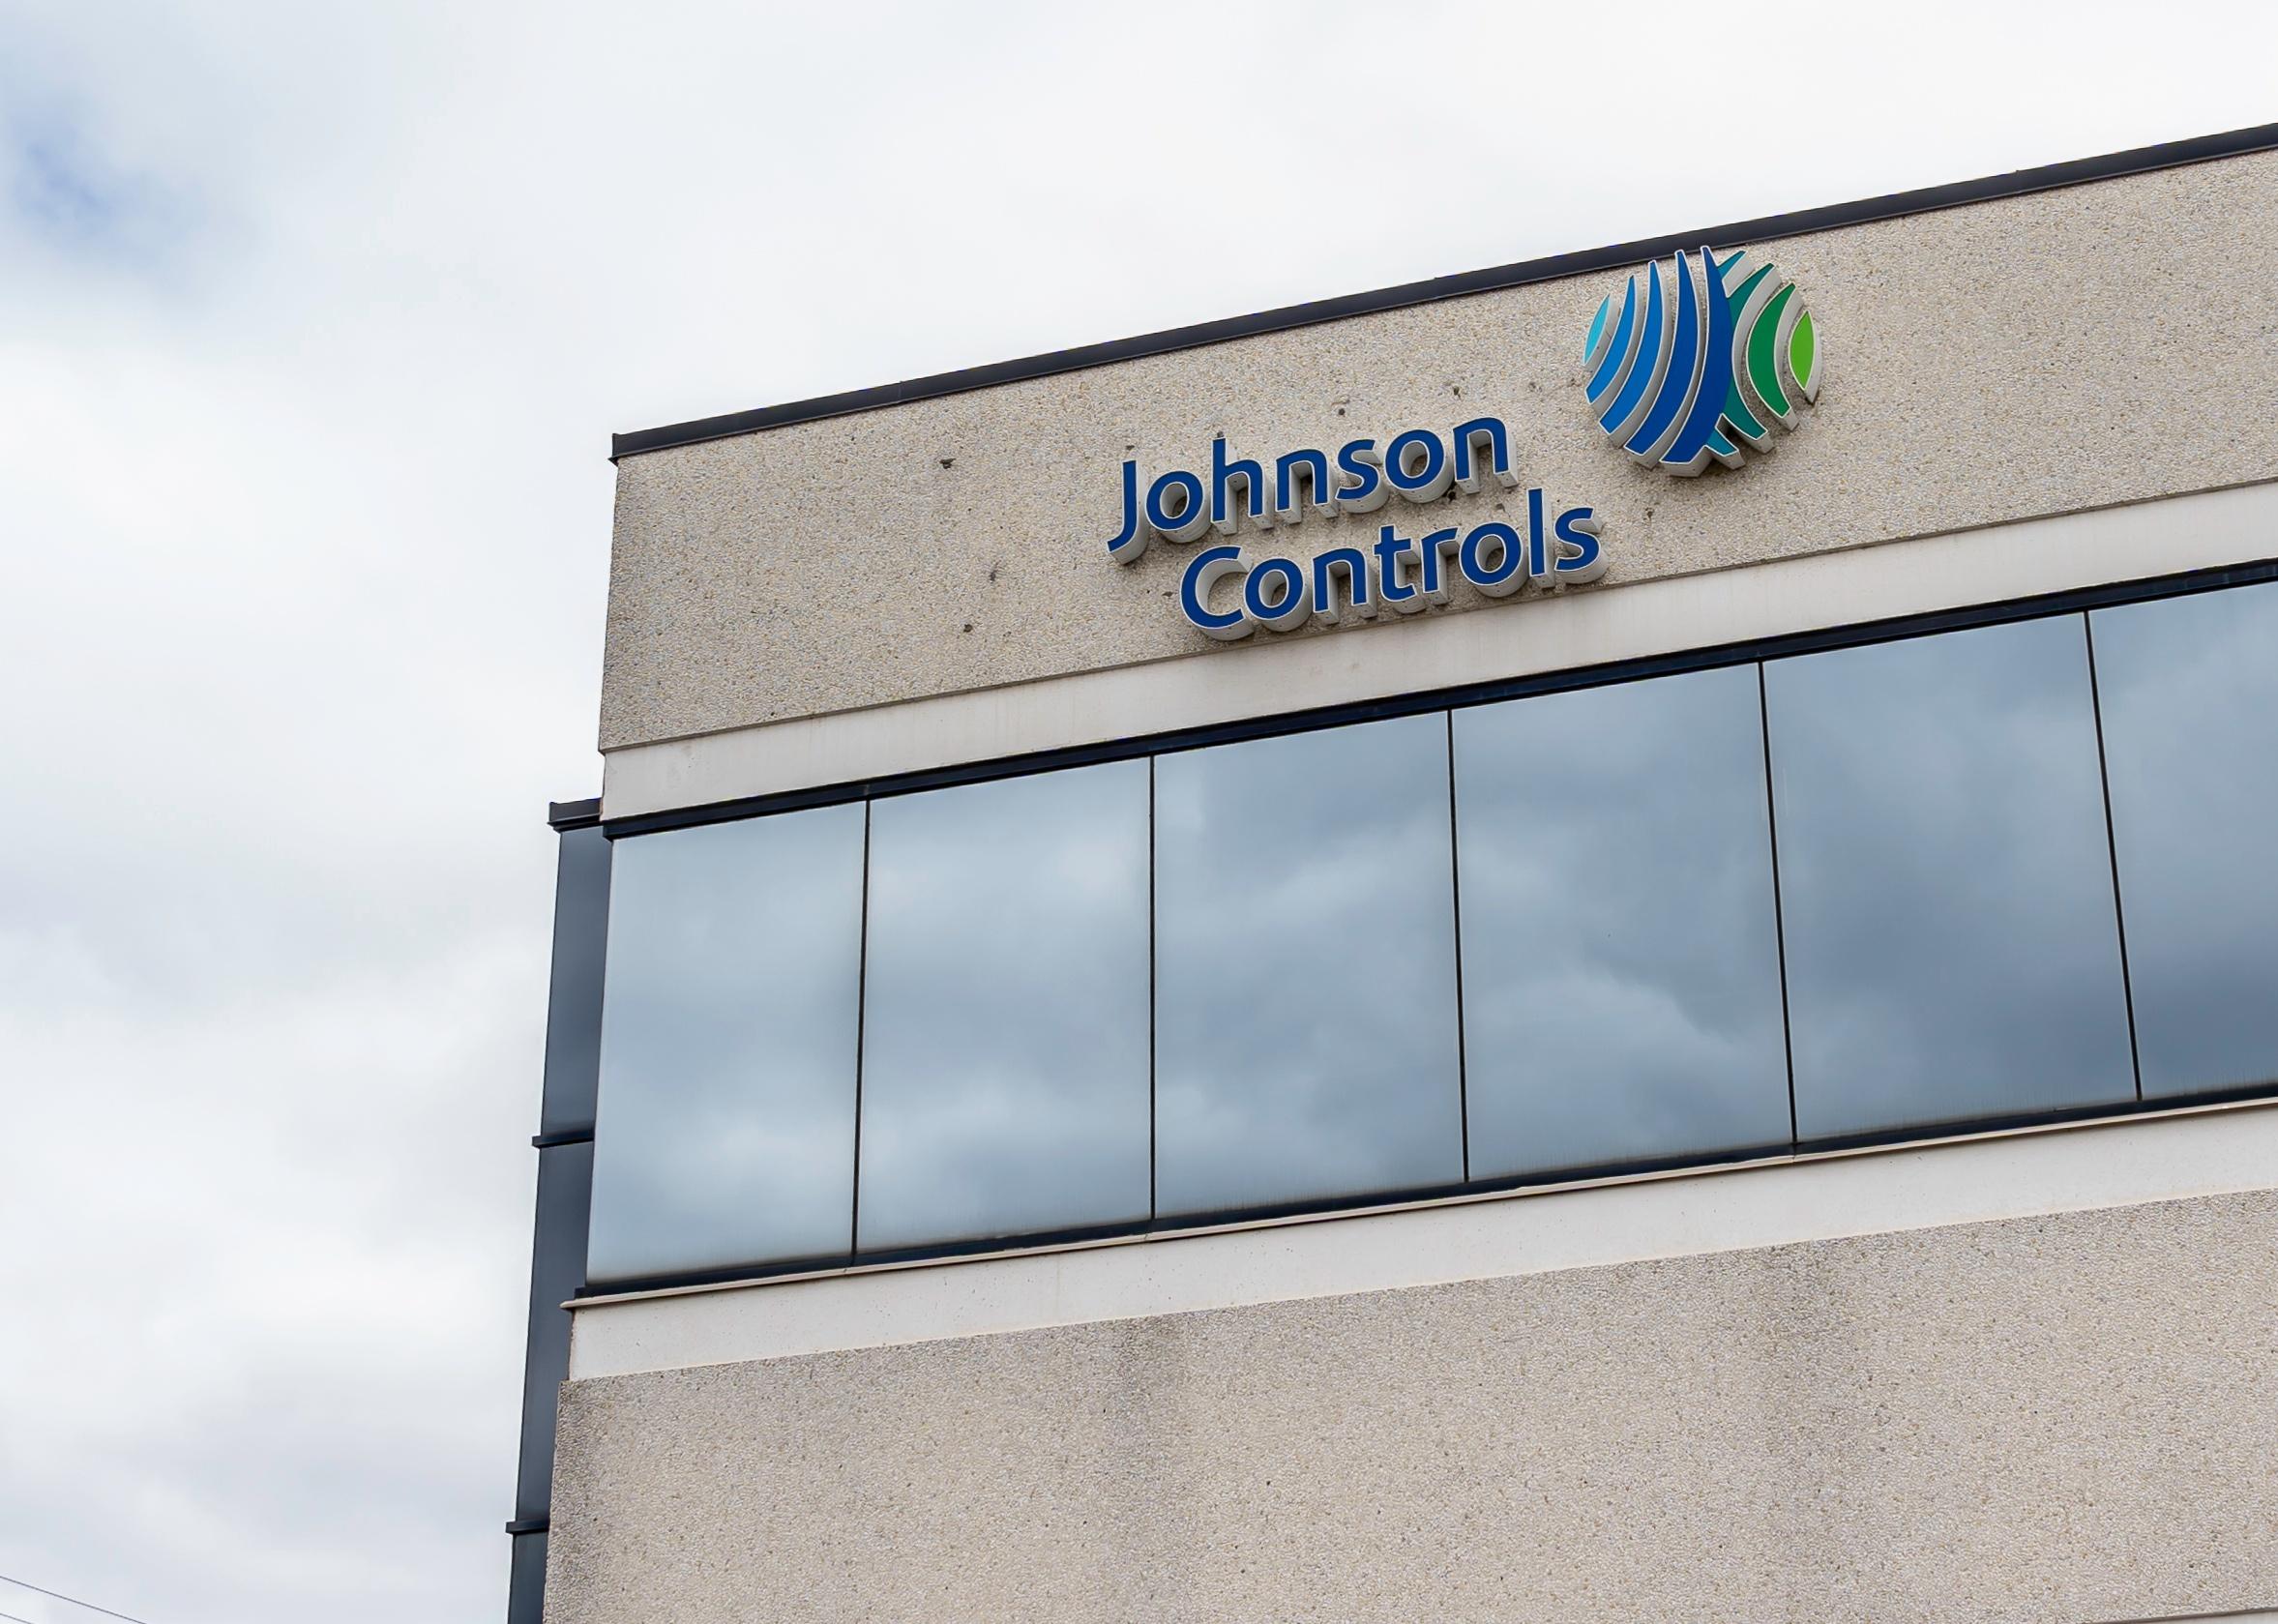 Sign of Johnson Controls on the building.